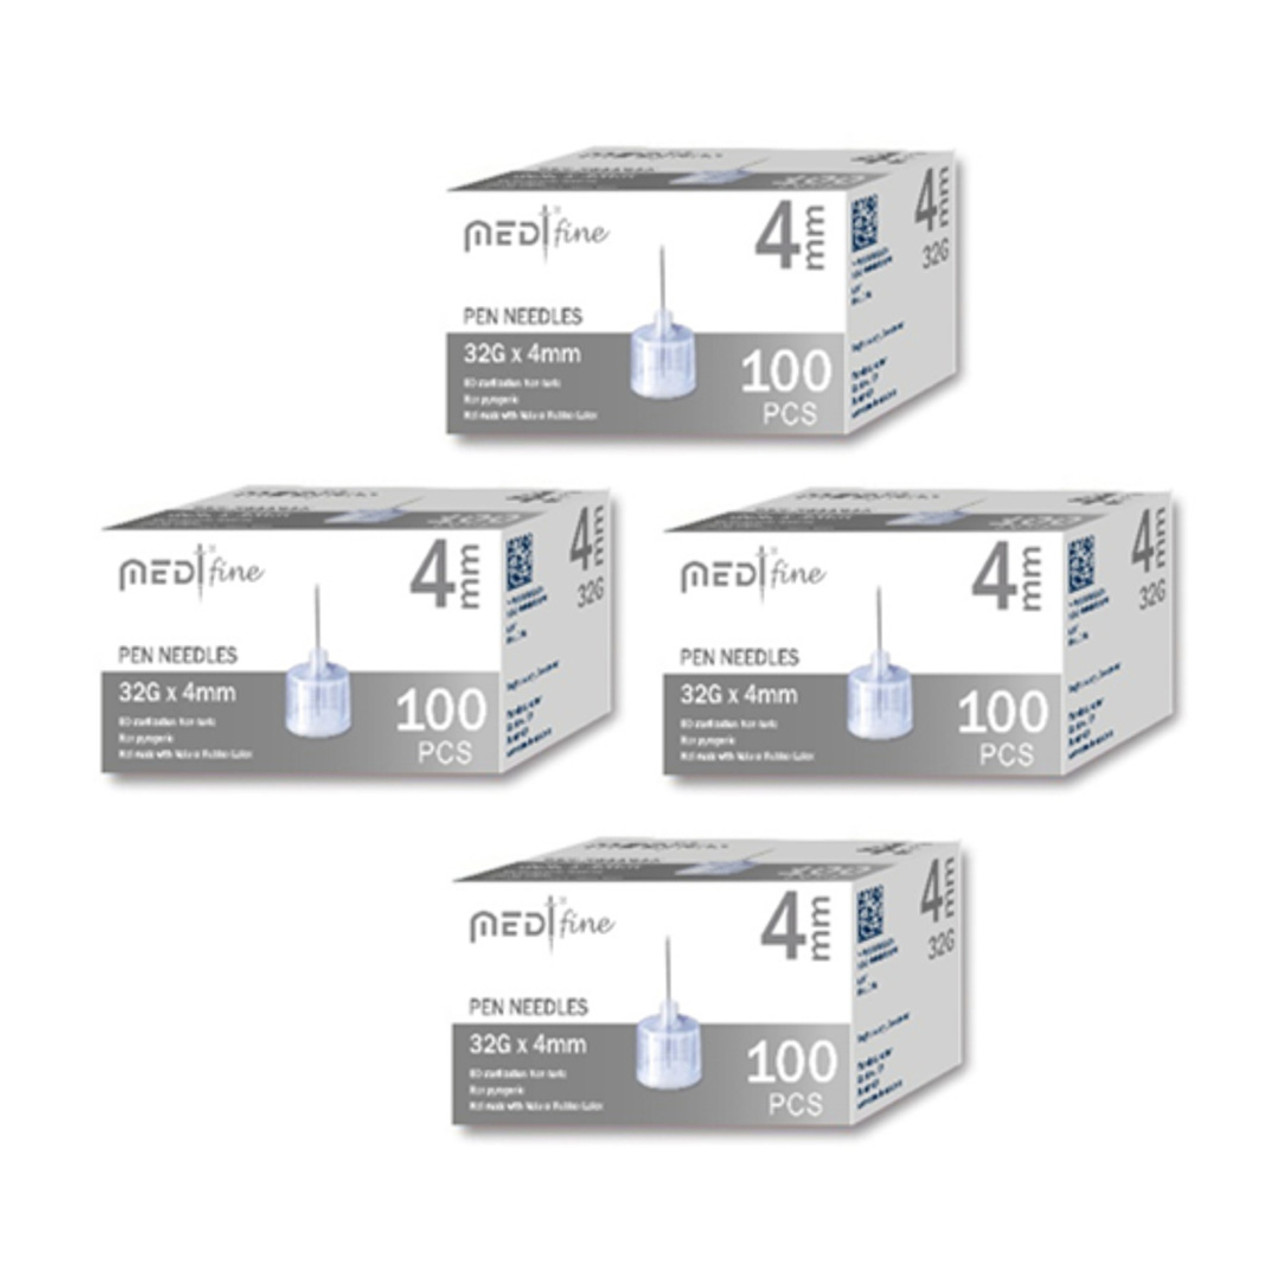  Medt - Fine Insulin Pen Needles (32G 4mm) - Diabetic Needles  for Insulin Injections, Ultra Fine Compatible with Most Diabetes Pens - 100  Ct, Pack of 1 : Health & Household